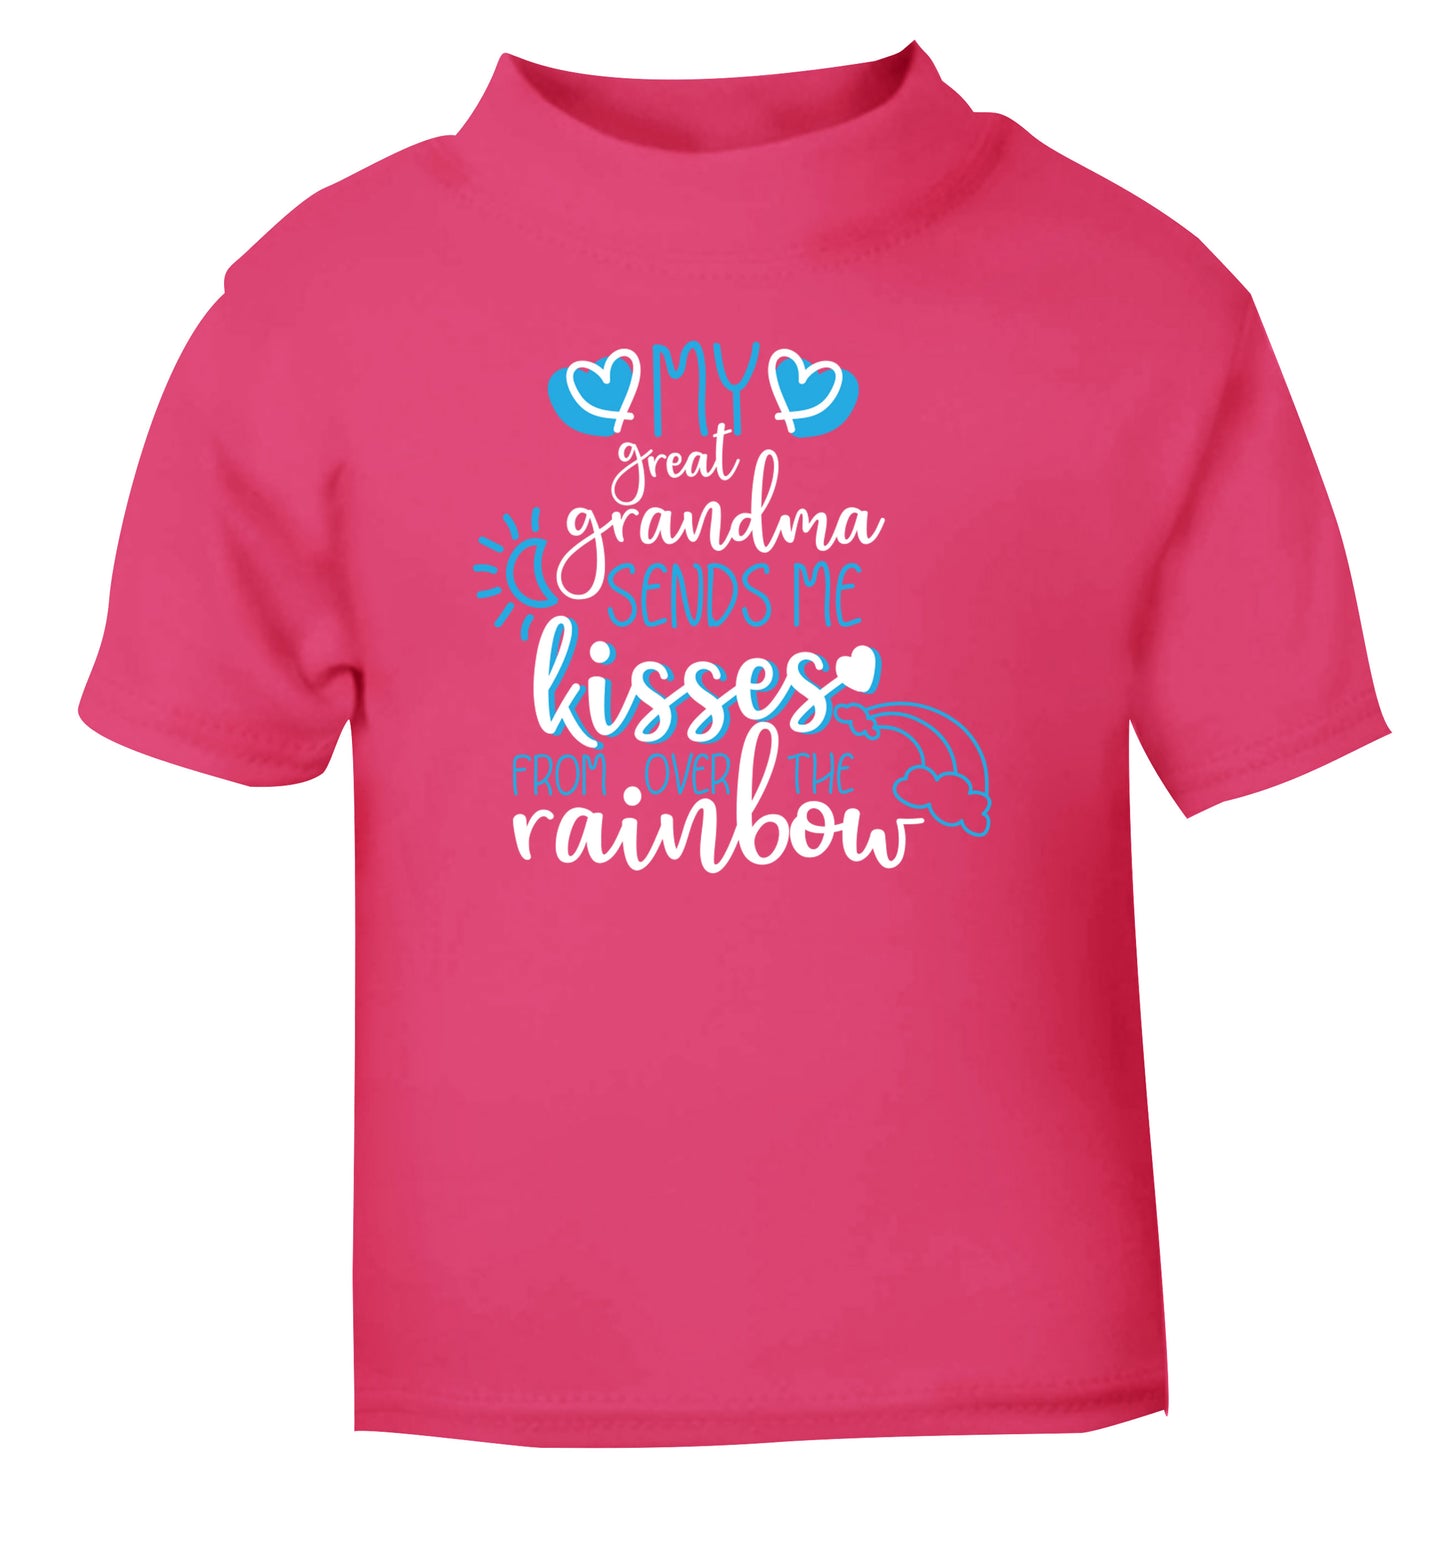 My great grandma sends me kisses from over the rainbow pink Baby Toddler Tshirt 2 Years